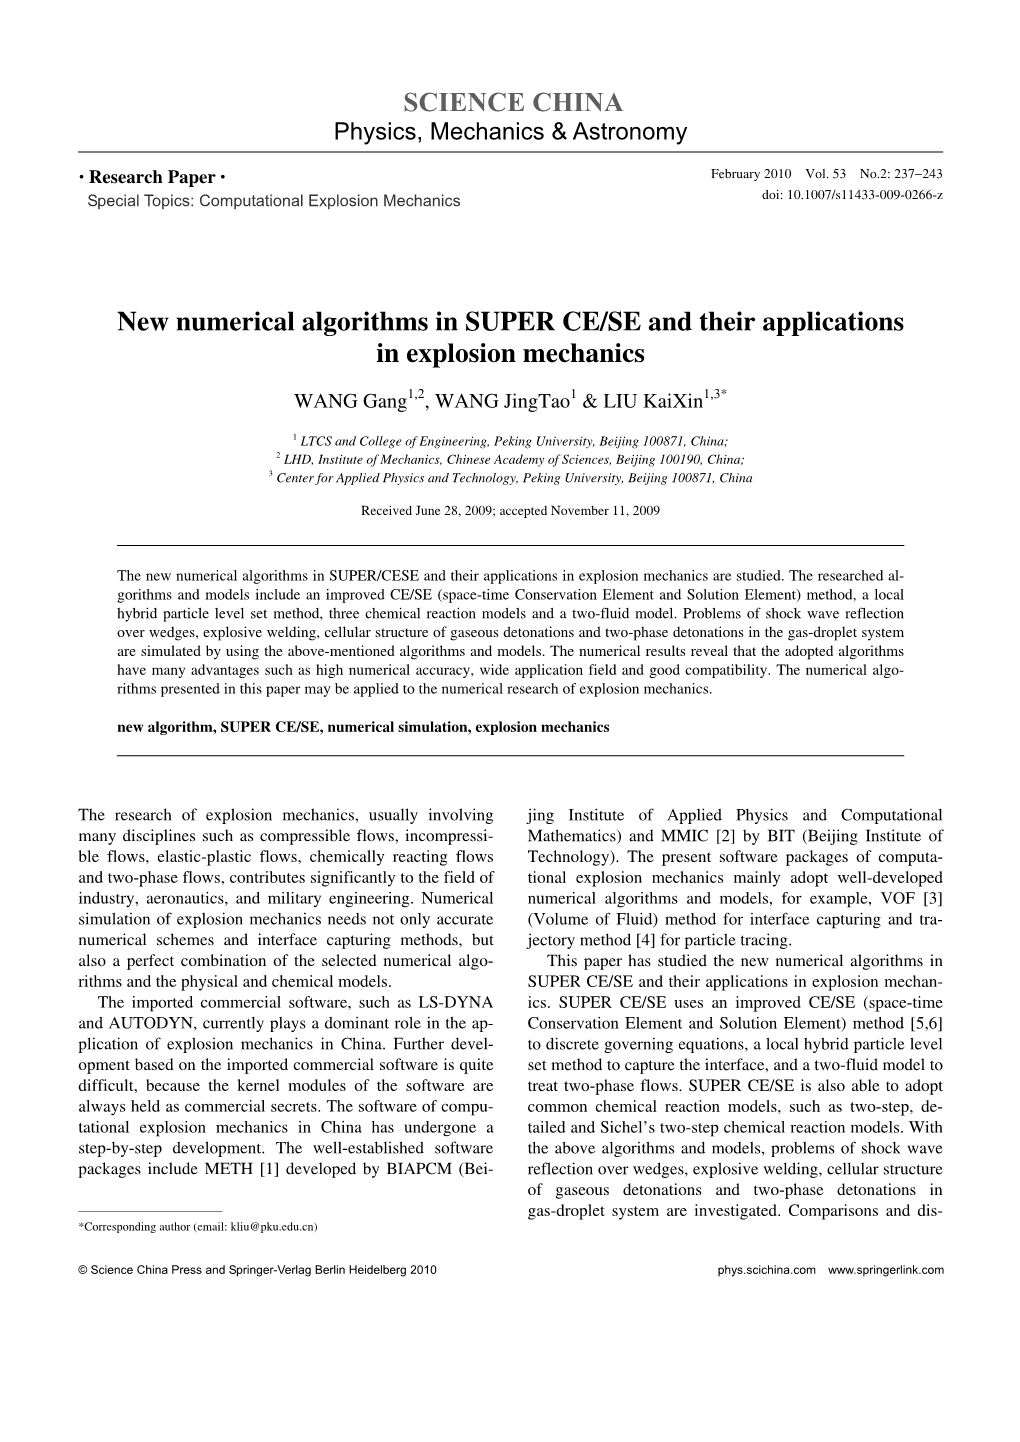 New Numerical Algorithms in SUPER CE/SE and Their Applications in Explosion Mechanics